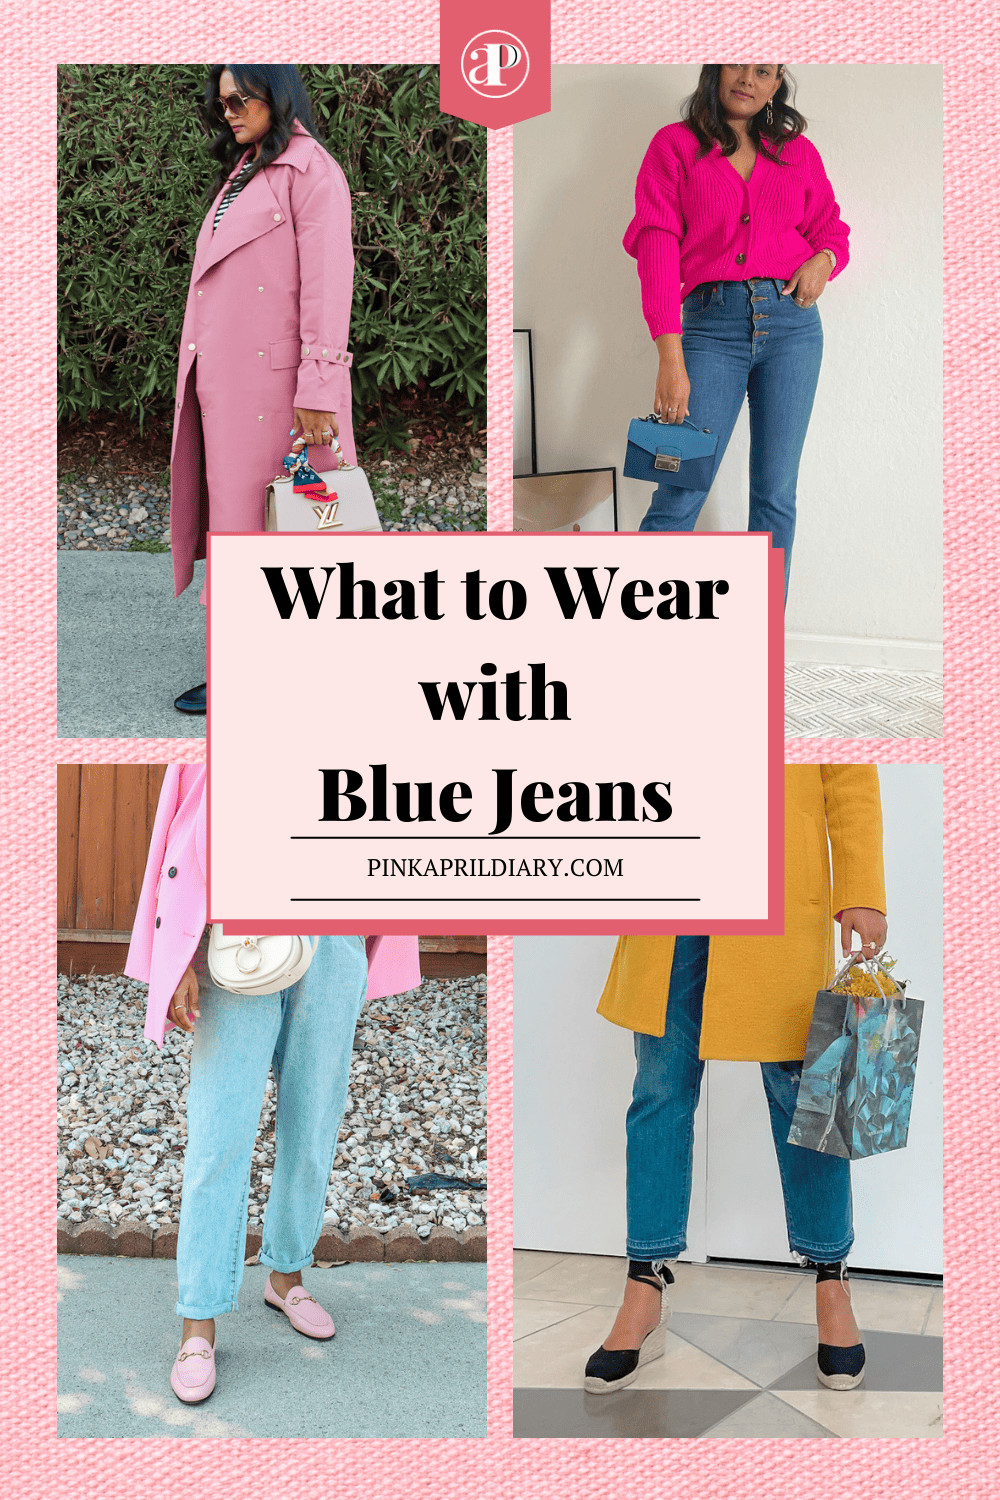 What to Wear with Blue Jeans in Spring to Look Chic